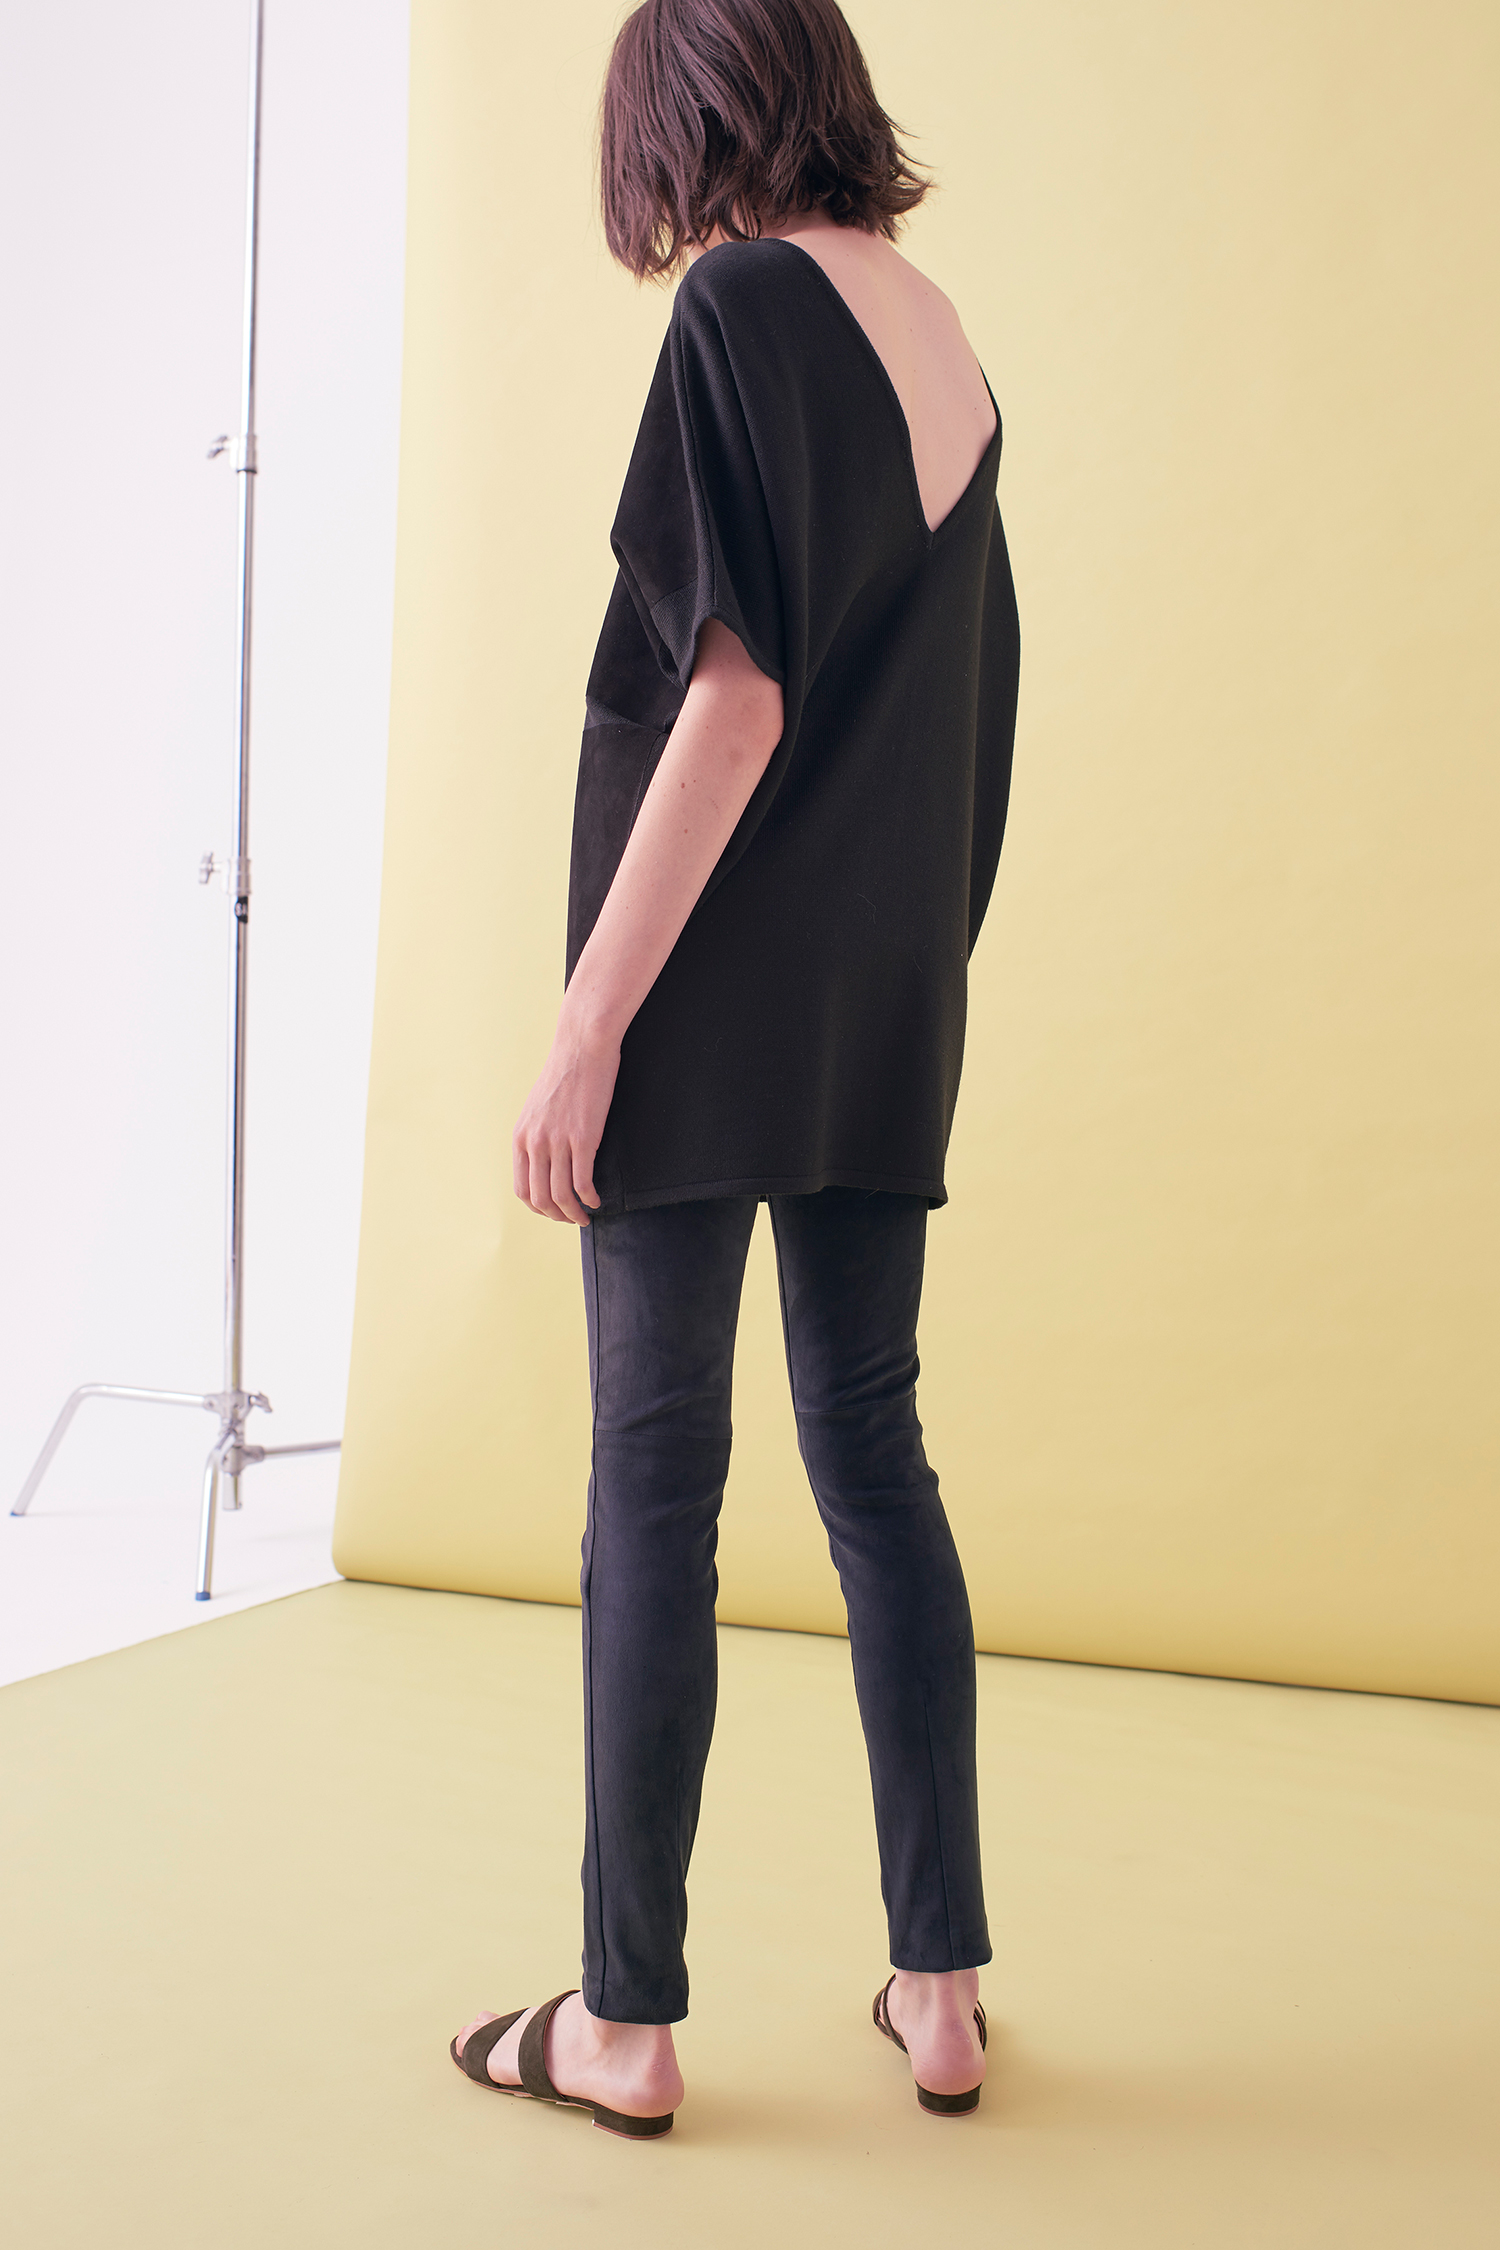 Sarah_Swann_SS17_04_Suede_And_Knit_Sweater_Midnight_B.jpg